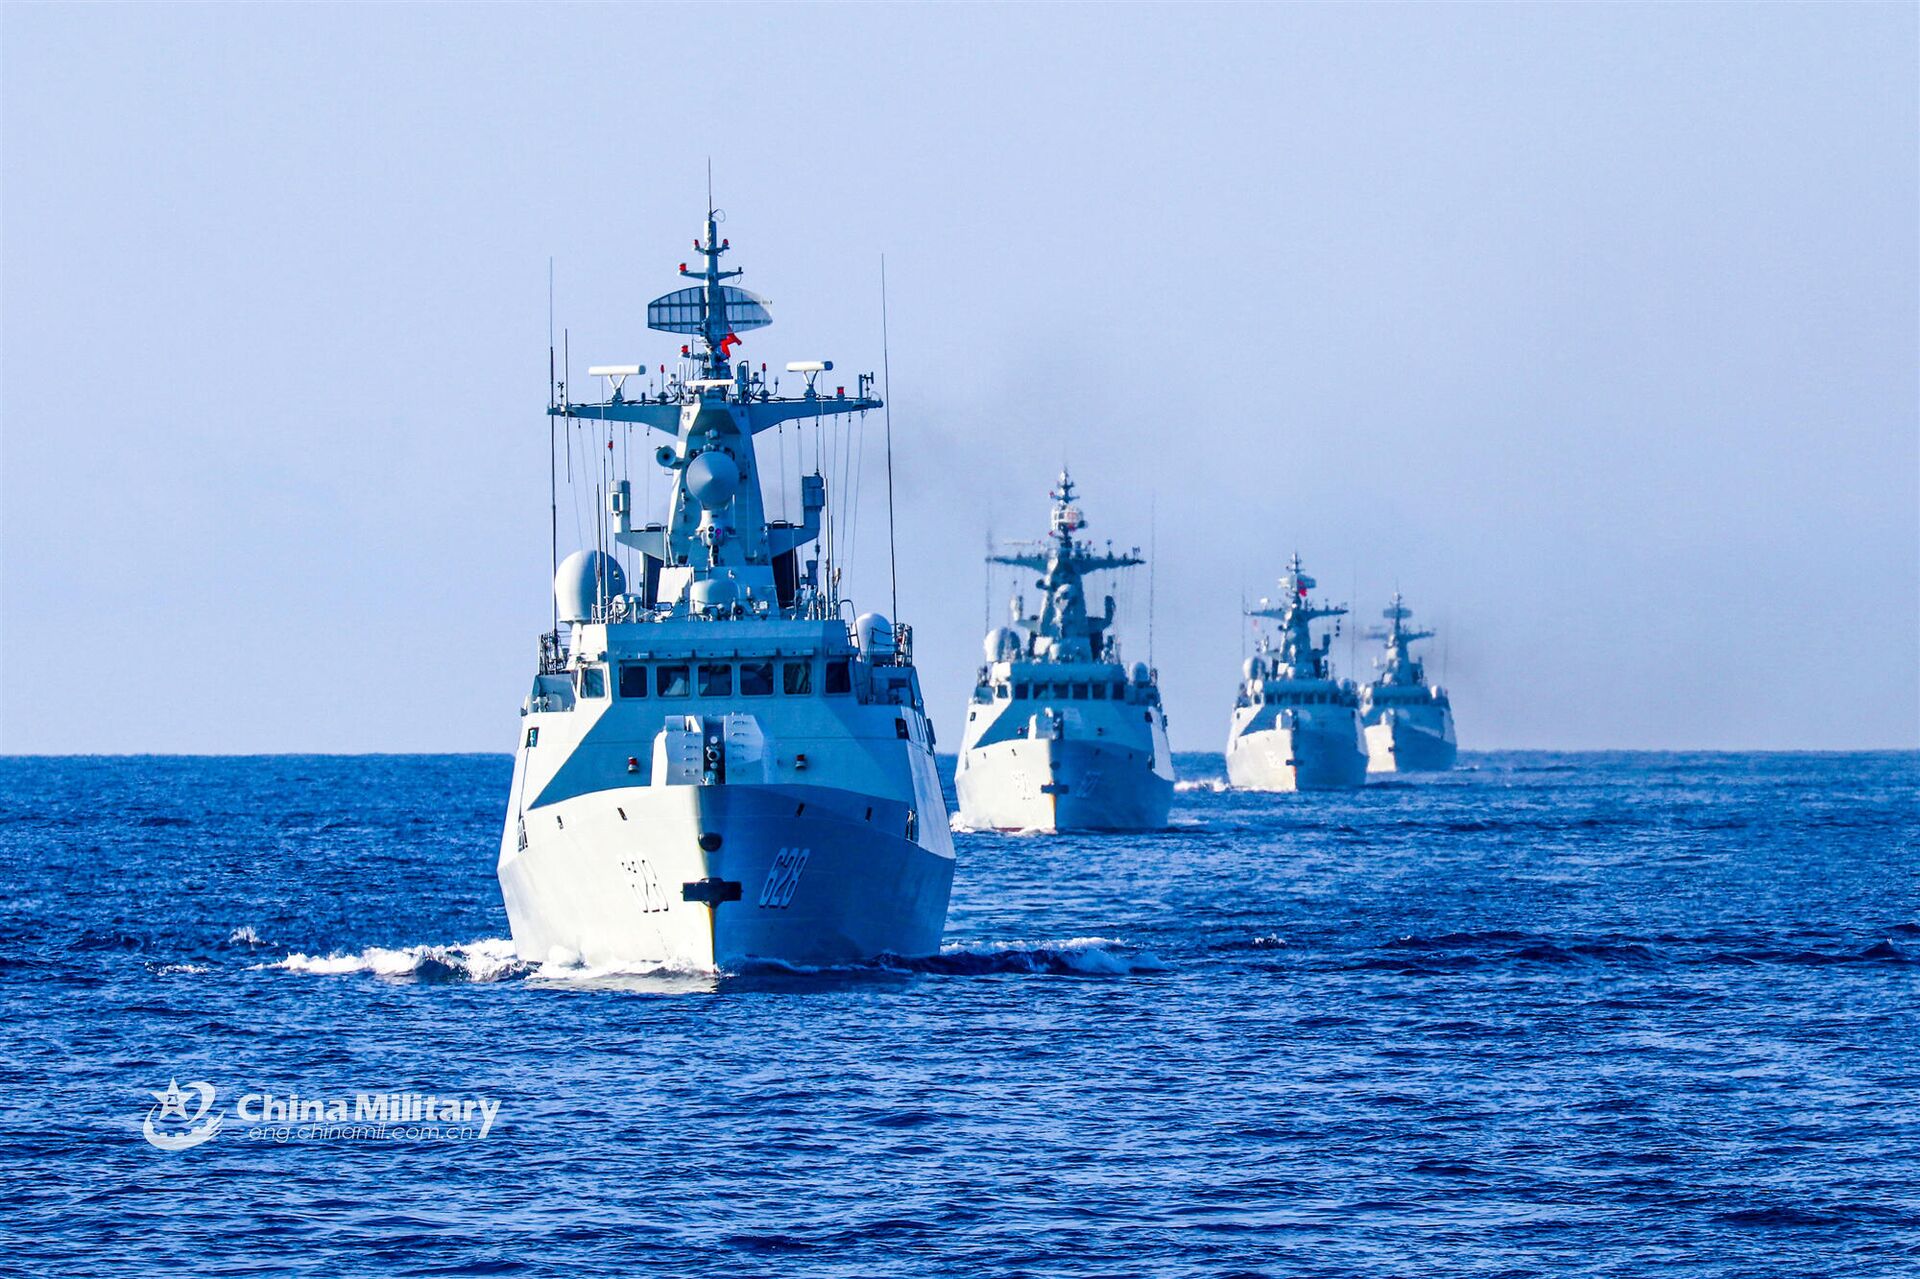 The frigate Enshi (Hull 627), Yongzhou (Hull 628), Bazhong (Hull 625), and Wuzhou (Hull 626) steam in formation during a 9-day maritime training exercise in waters of the South China Sea in late November, 2020. They are attached to a frigate flotilla of the navy under the PLA Southern Theater Command. - Sputnik International, 1920, 15.11.2021